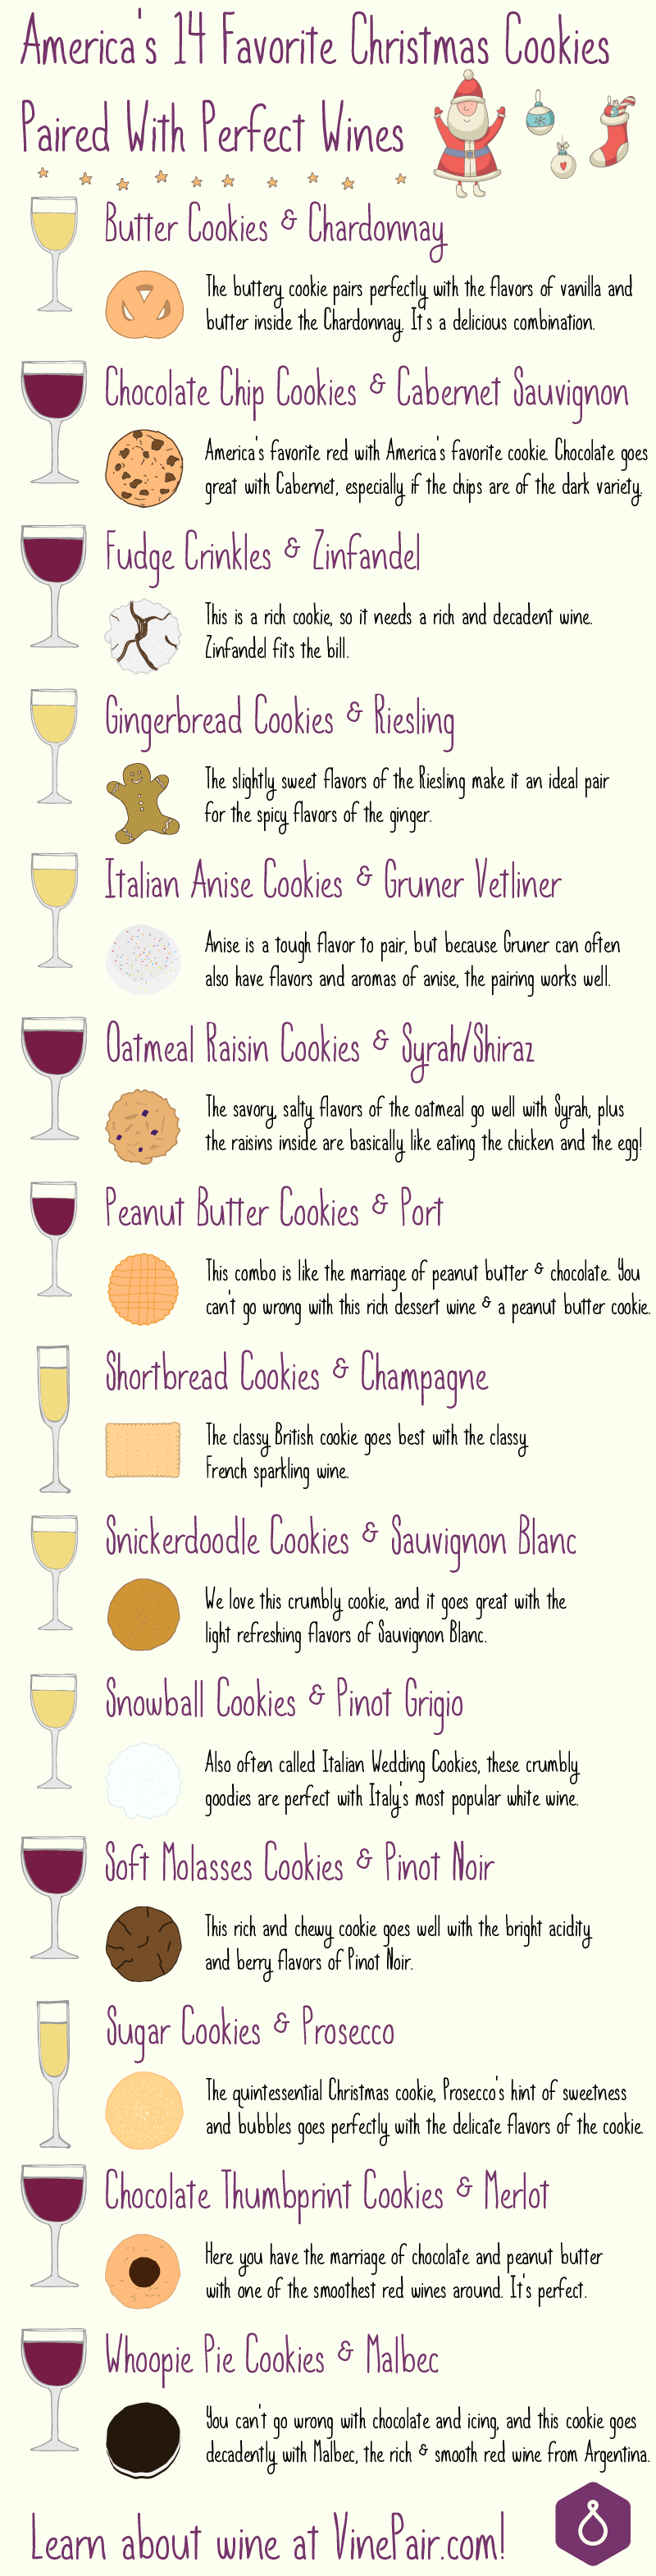 Pair your Christmas Cookies with the Perfect Wine